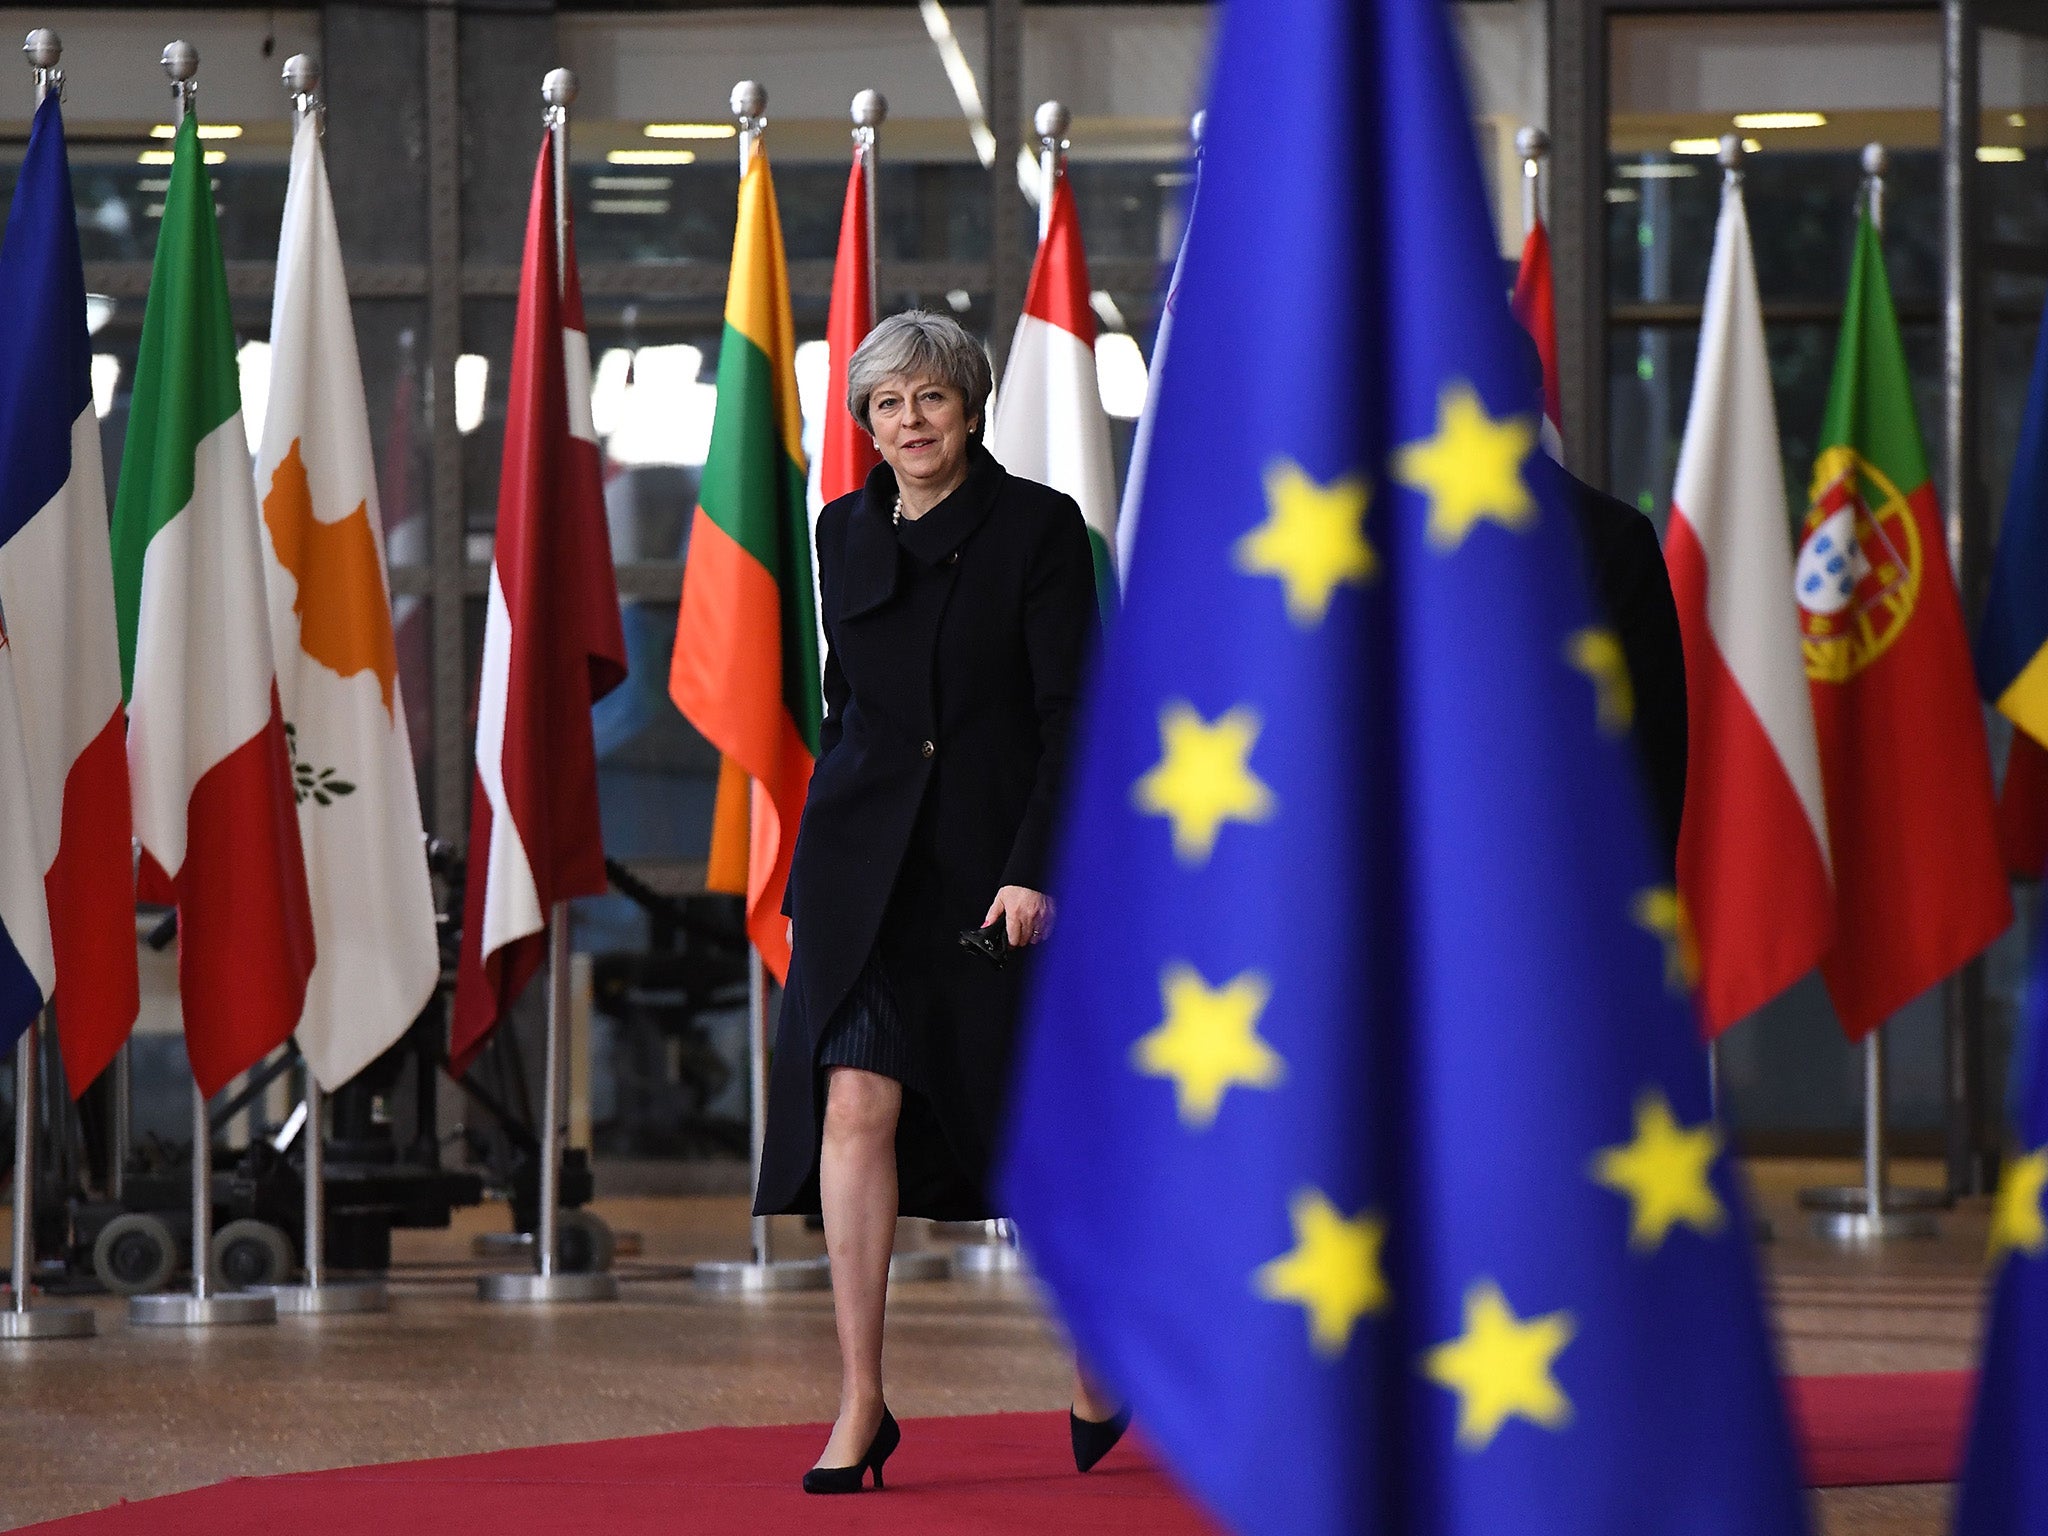 Theresa May in Brussels in December, when the Brexit talks moved onto trade - but there is still no 'clarity' her MPs say